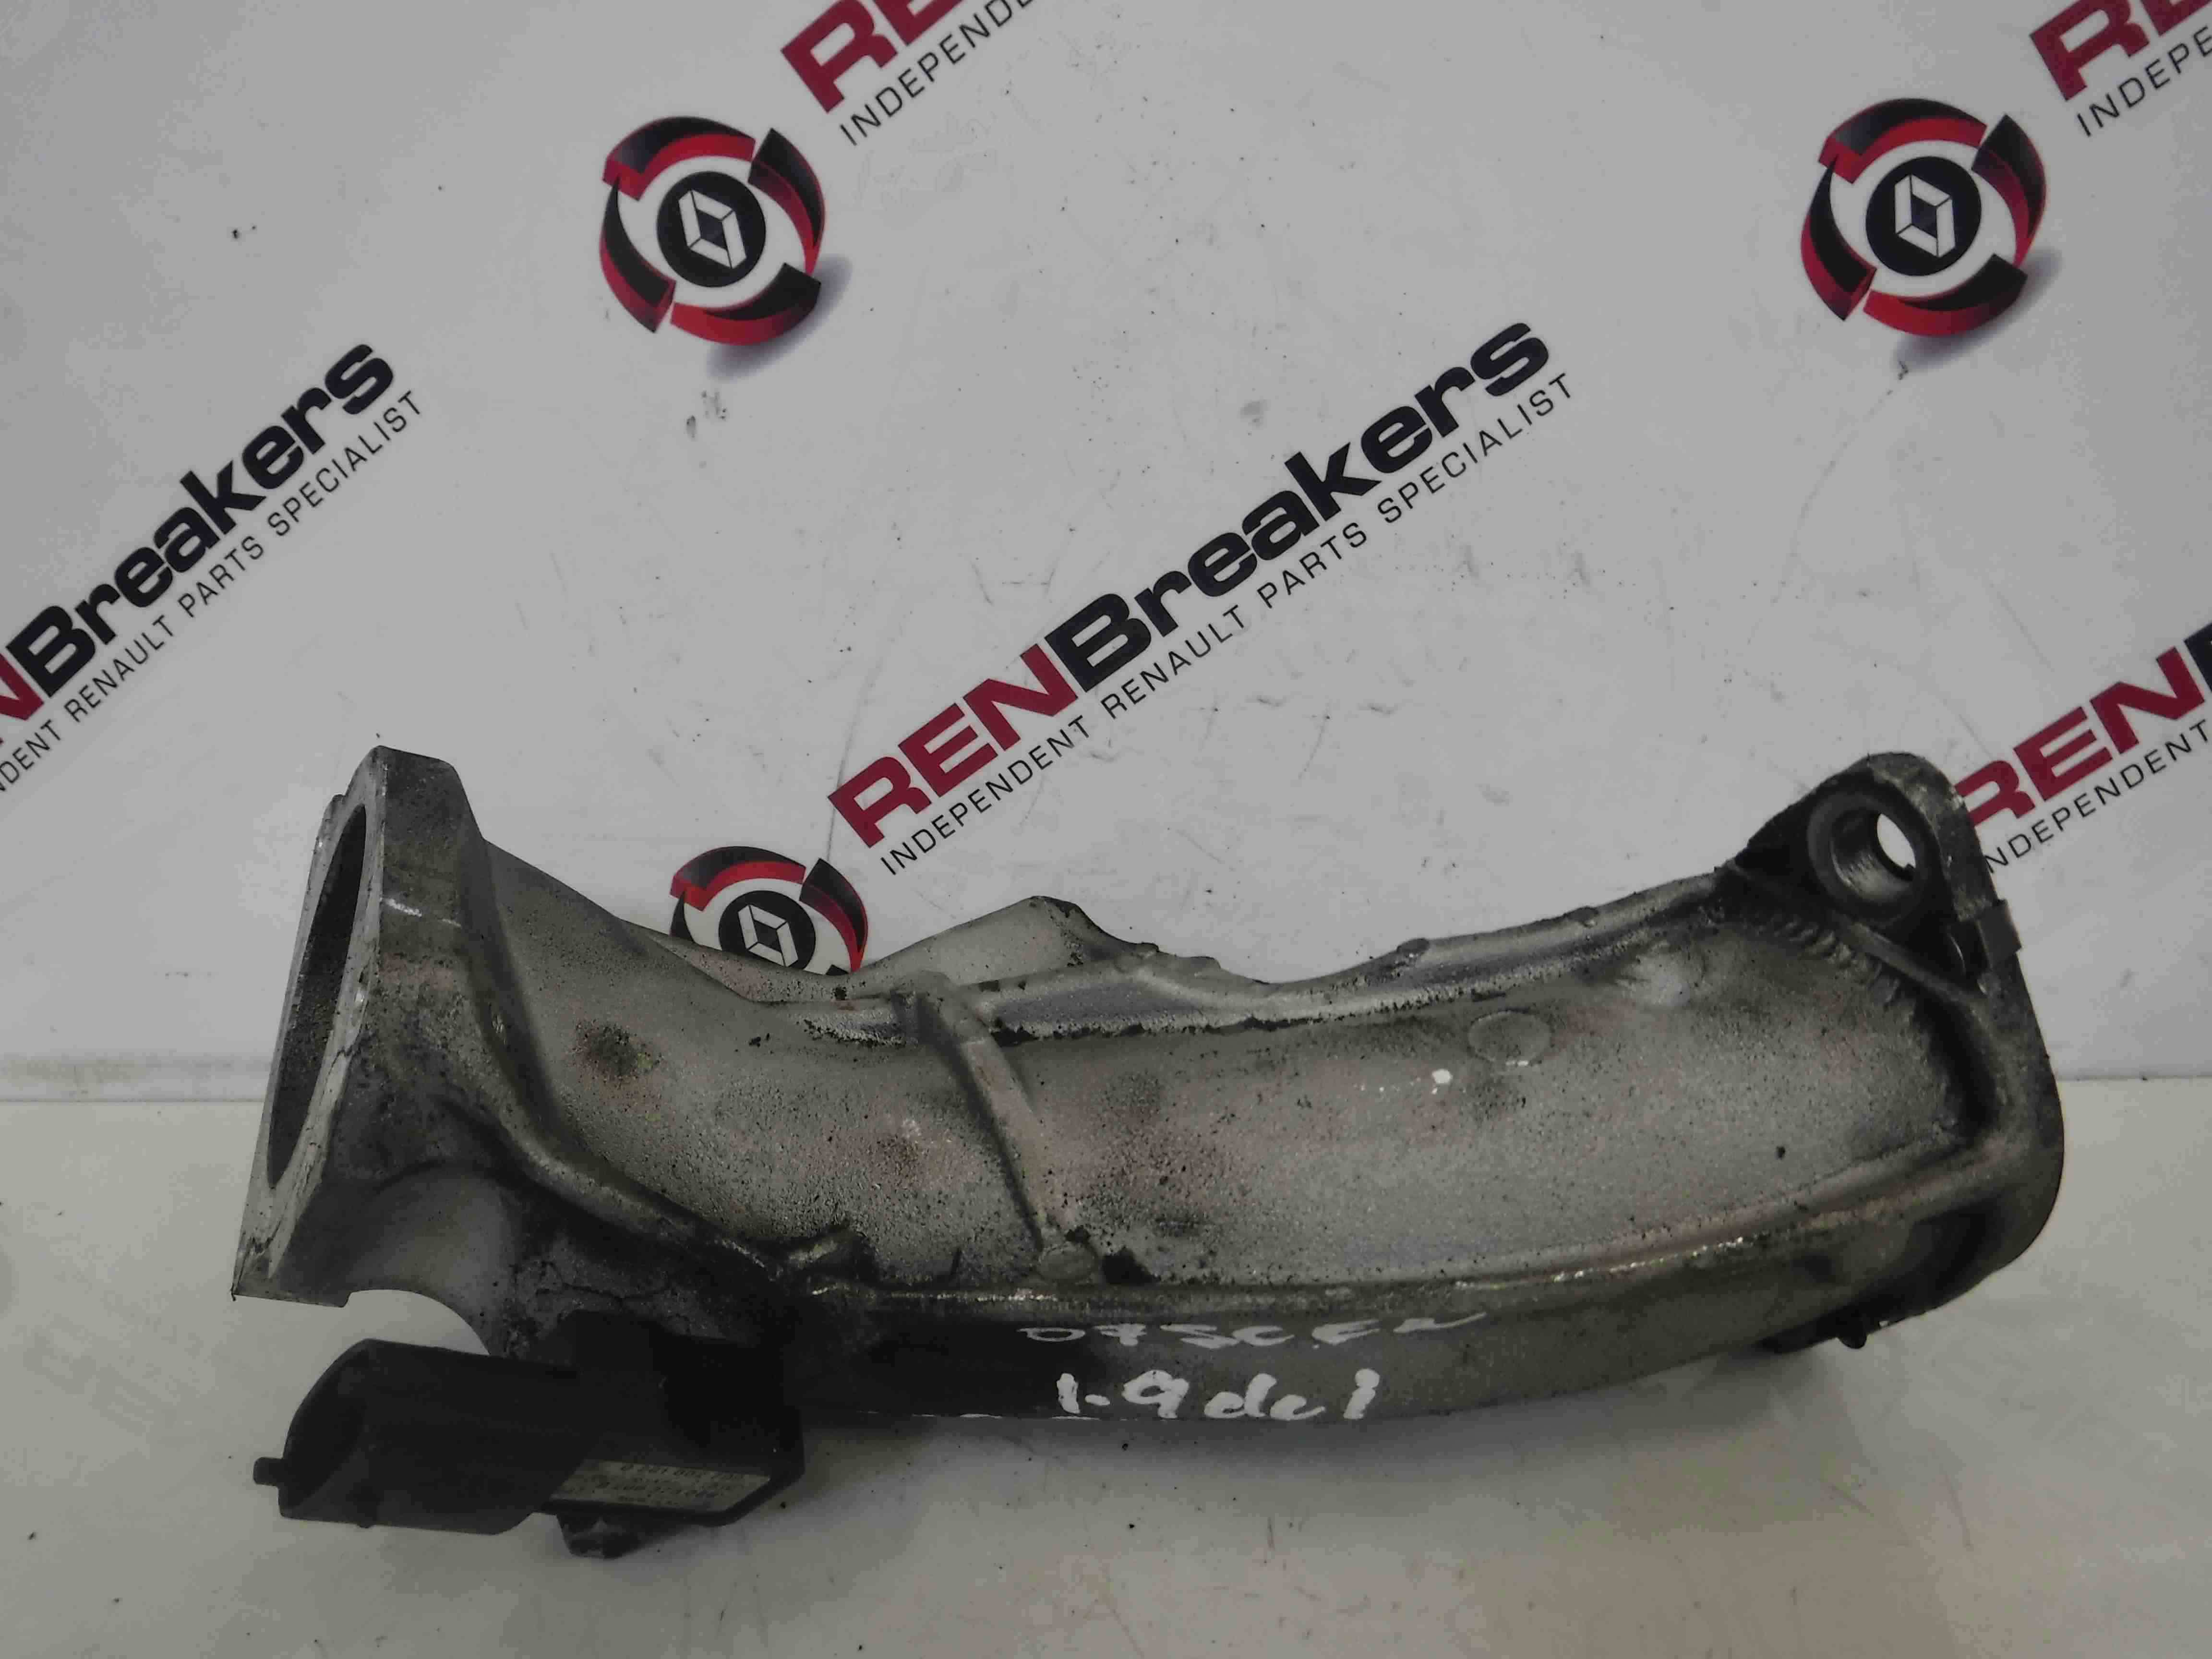 Renault Scenic 2003-2009 1.9 dCi Intake Manifold EGR Pipe F9Q 818 A2C53027874